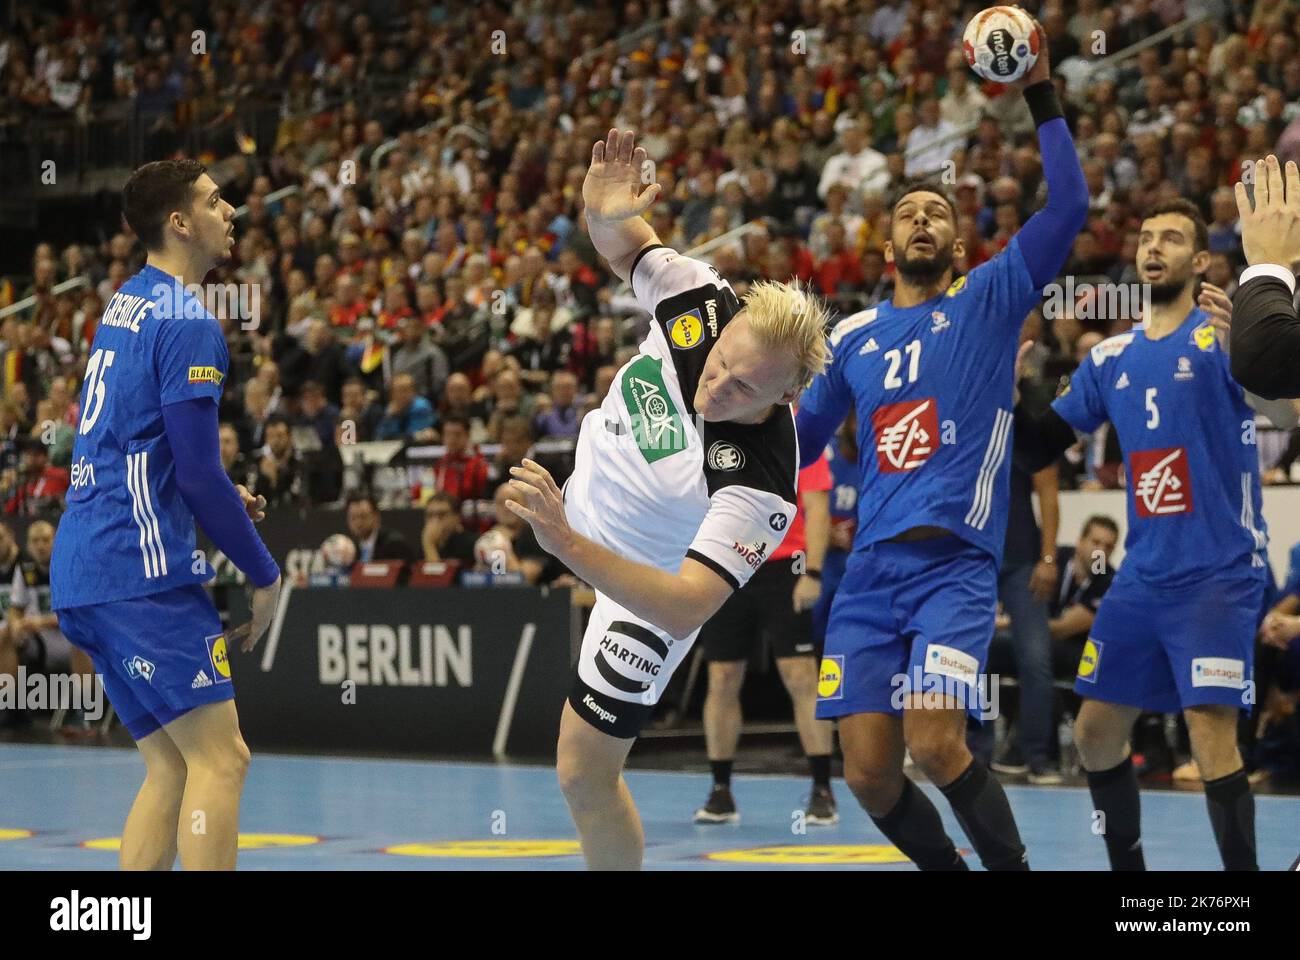 Patrick Wiencek (Germany) and Mathieu Grebille,Adrien Dipanda,Nedim Remili (France) during the IHF Men's World Championship 2019, Group A handball match between Germany and France on January 15, 2019 at Mercedes-Benz Arena in Berlin, Germany  Stock Photo